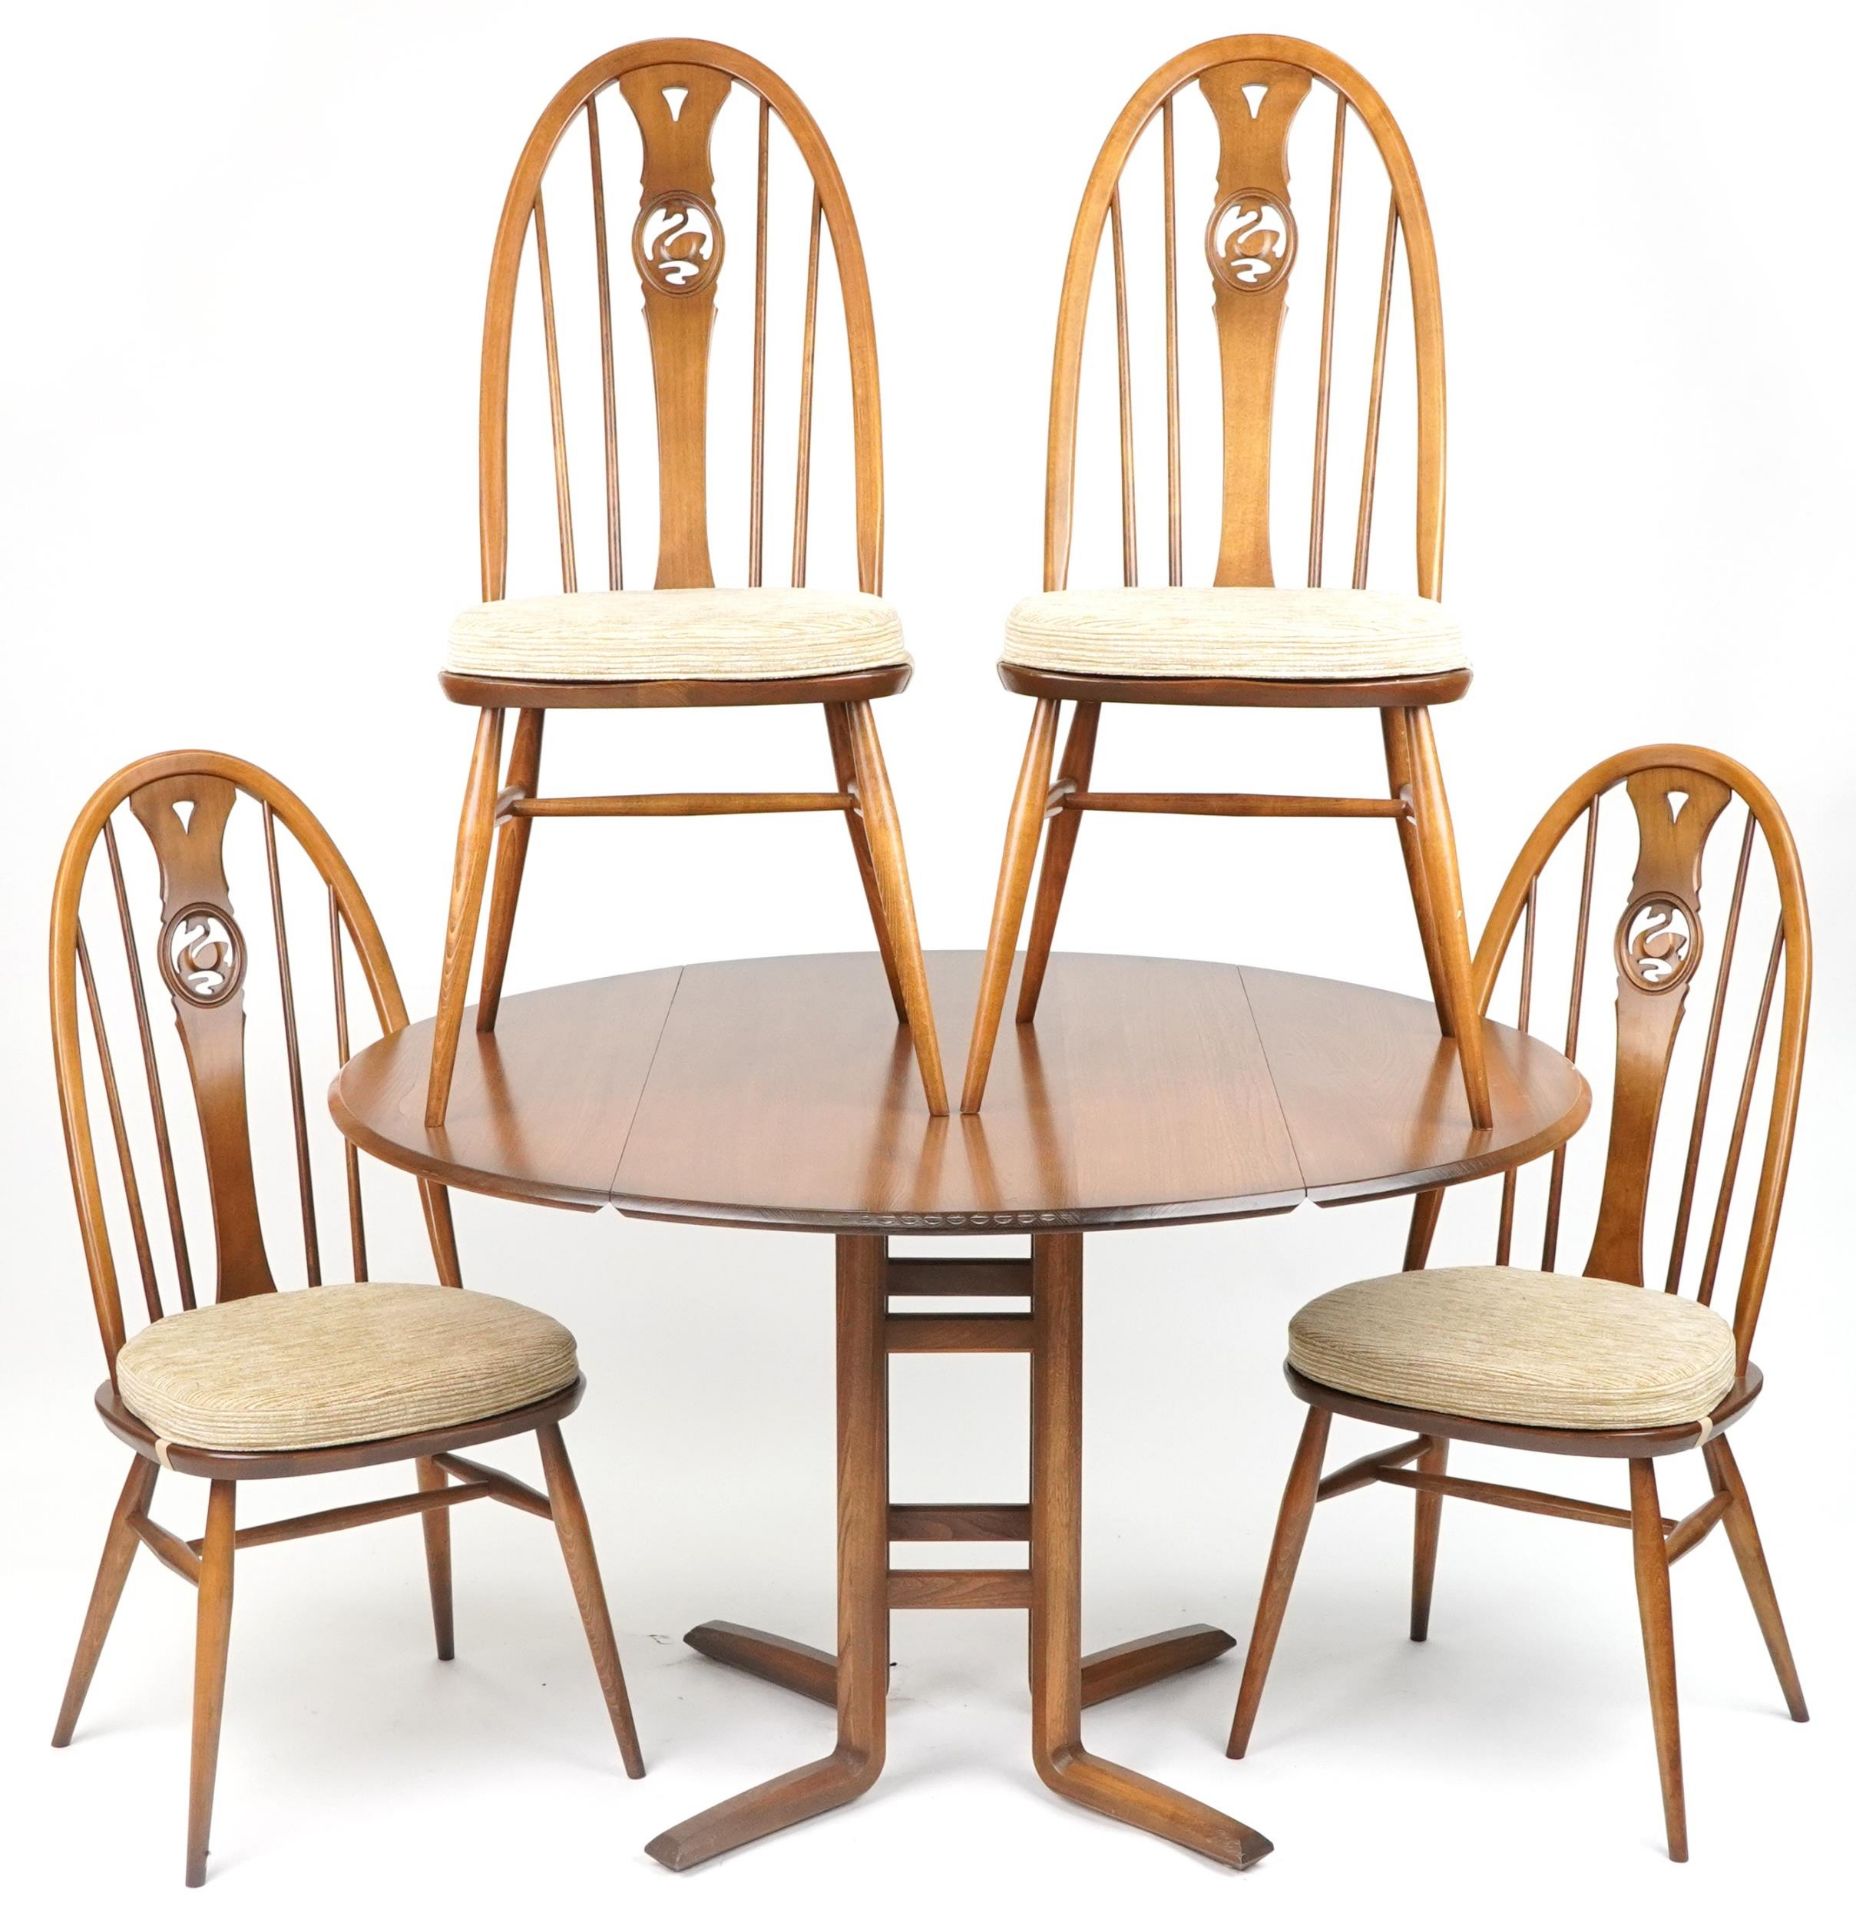 Ercol elm drop leaf dining table with four chairs carved with swans, the table 74cm H x 63cm W x